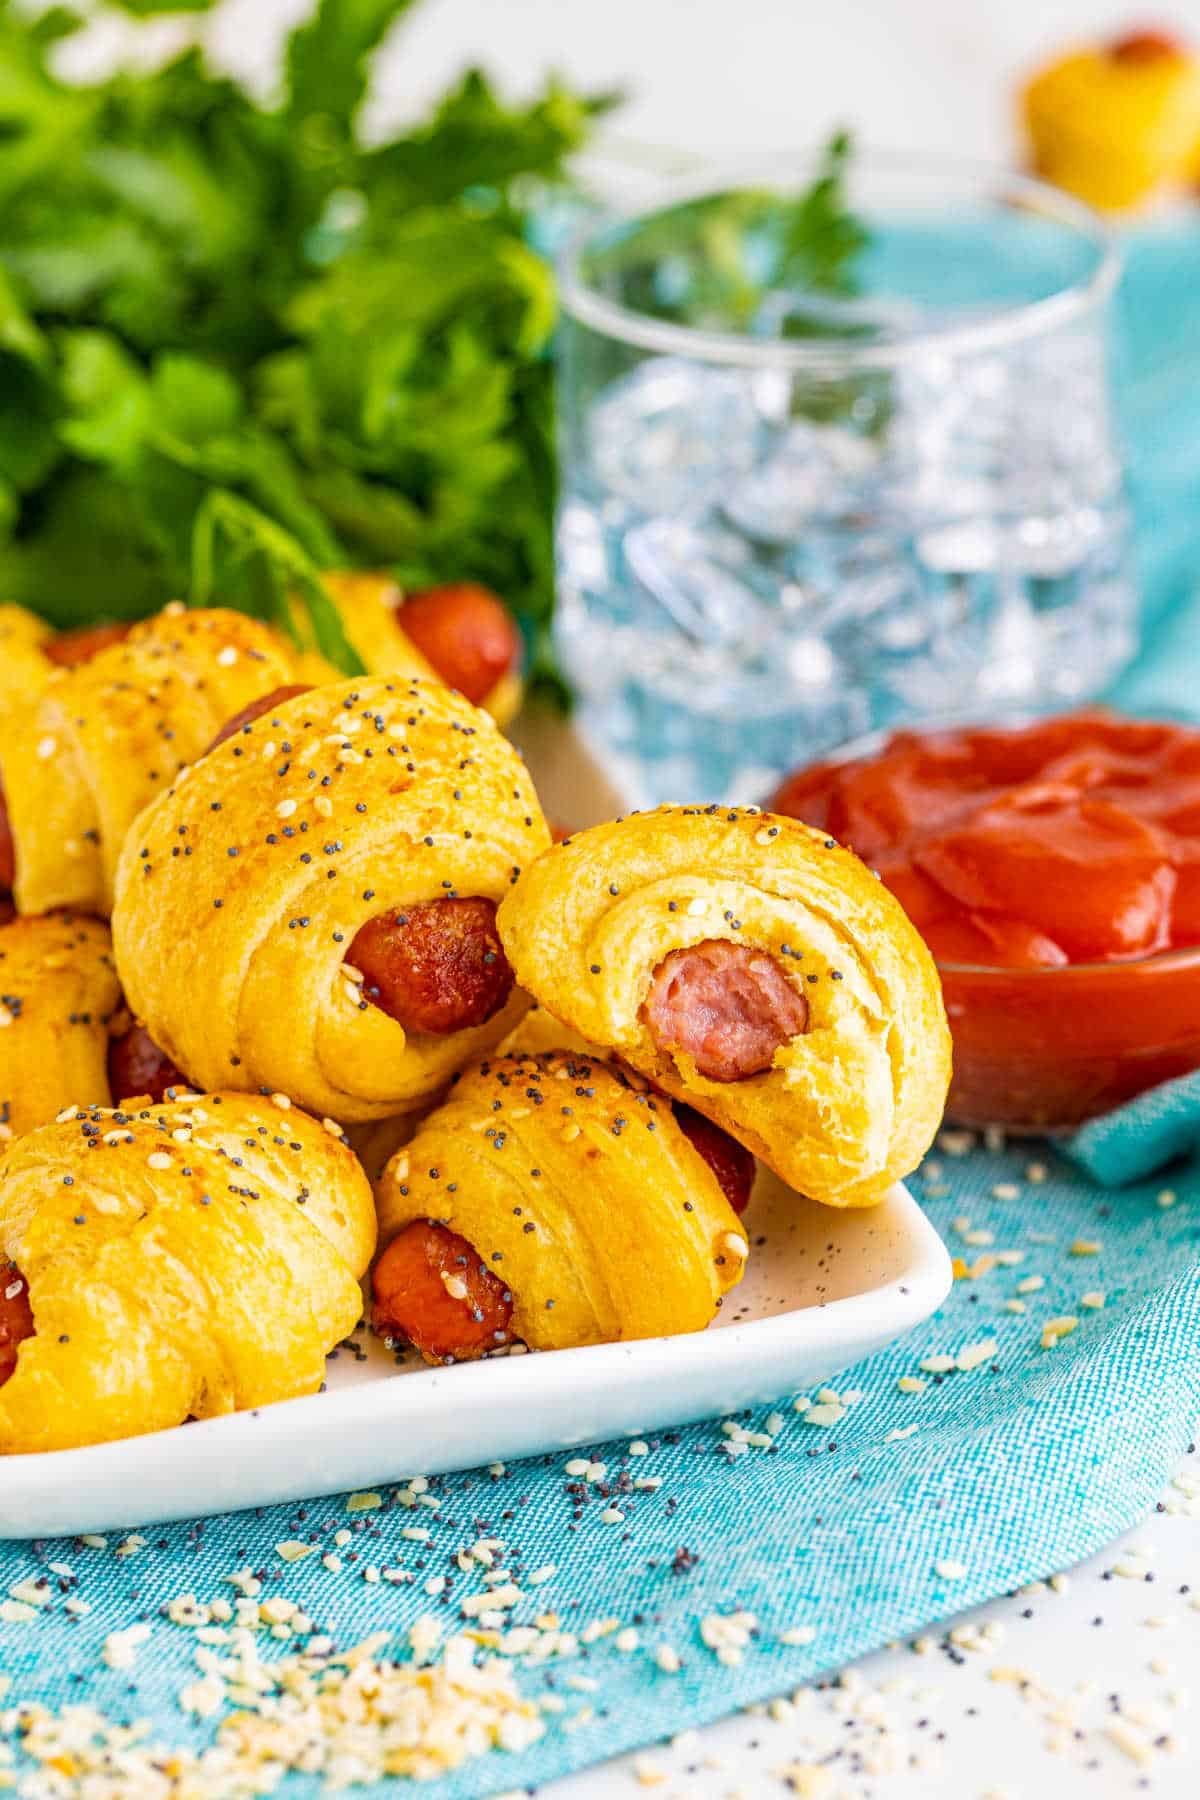 Mini Pigs in a blanket from Simply Stacie